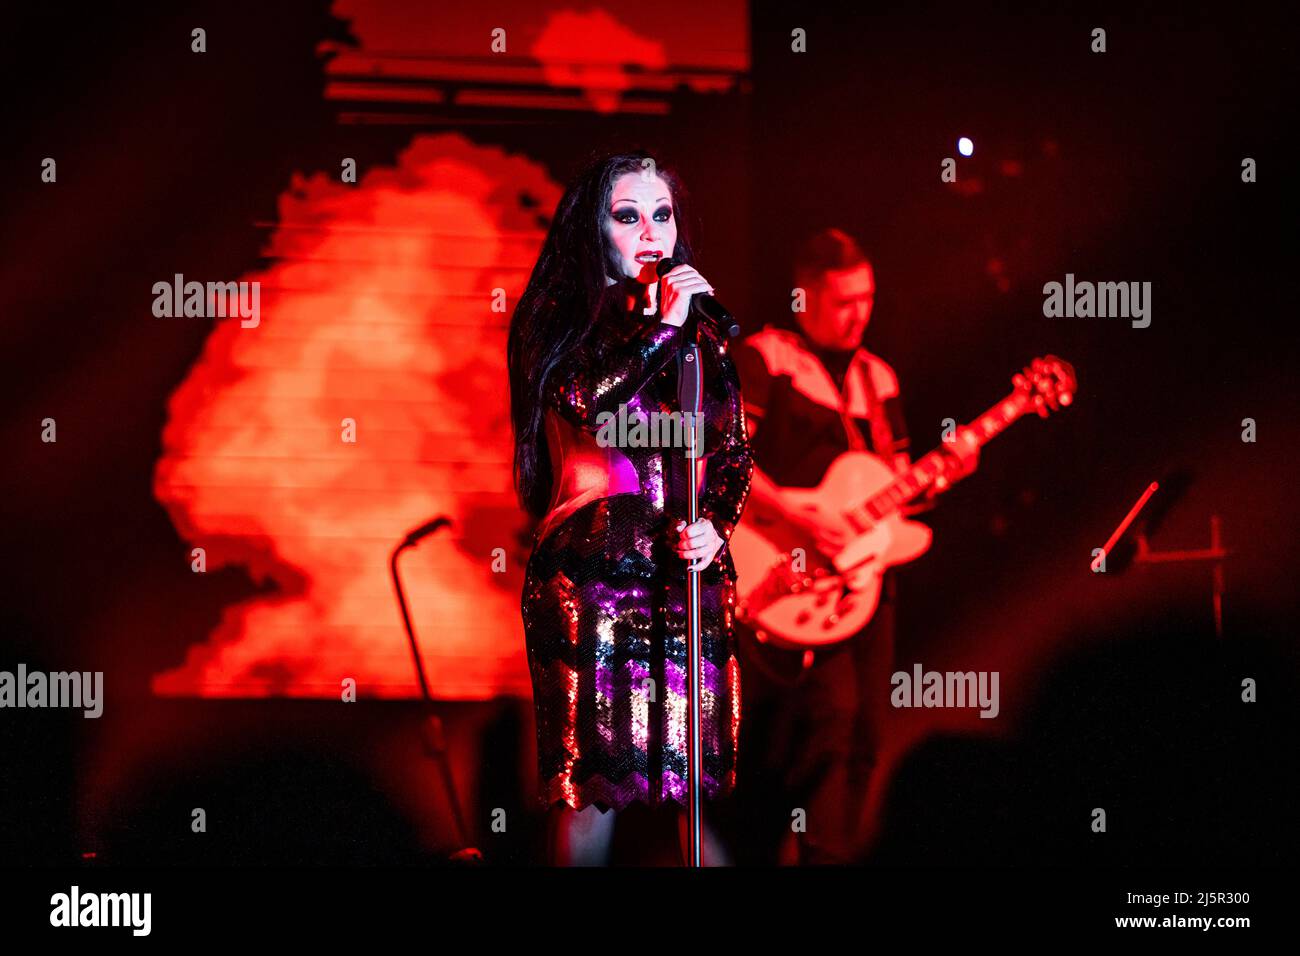 Alaska and Nacho Canut of Fangoria perform in concert at Sant Jordi Club on April 24, 2022 in Barcelona, Spain. (Photo by Silvia Isach) Stock Photo